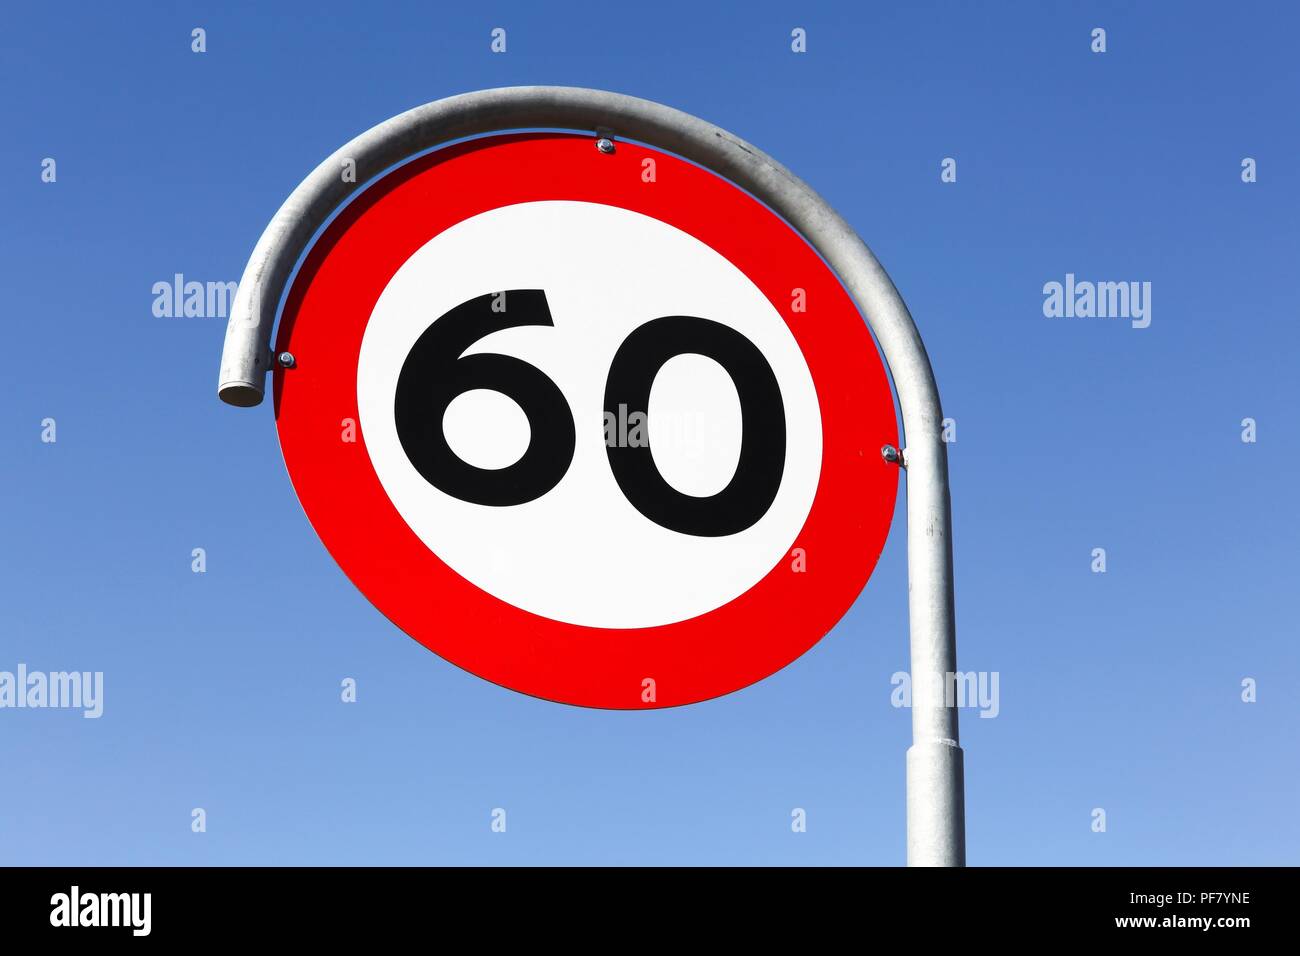 Speed limit traffic sign 60 on the road Stock Photo